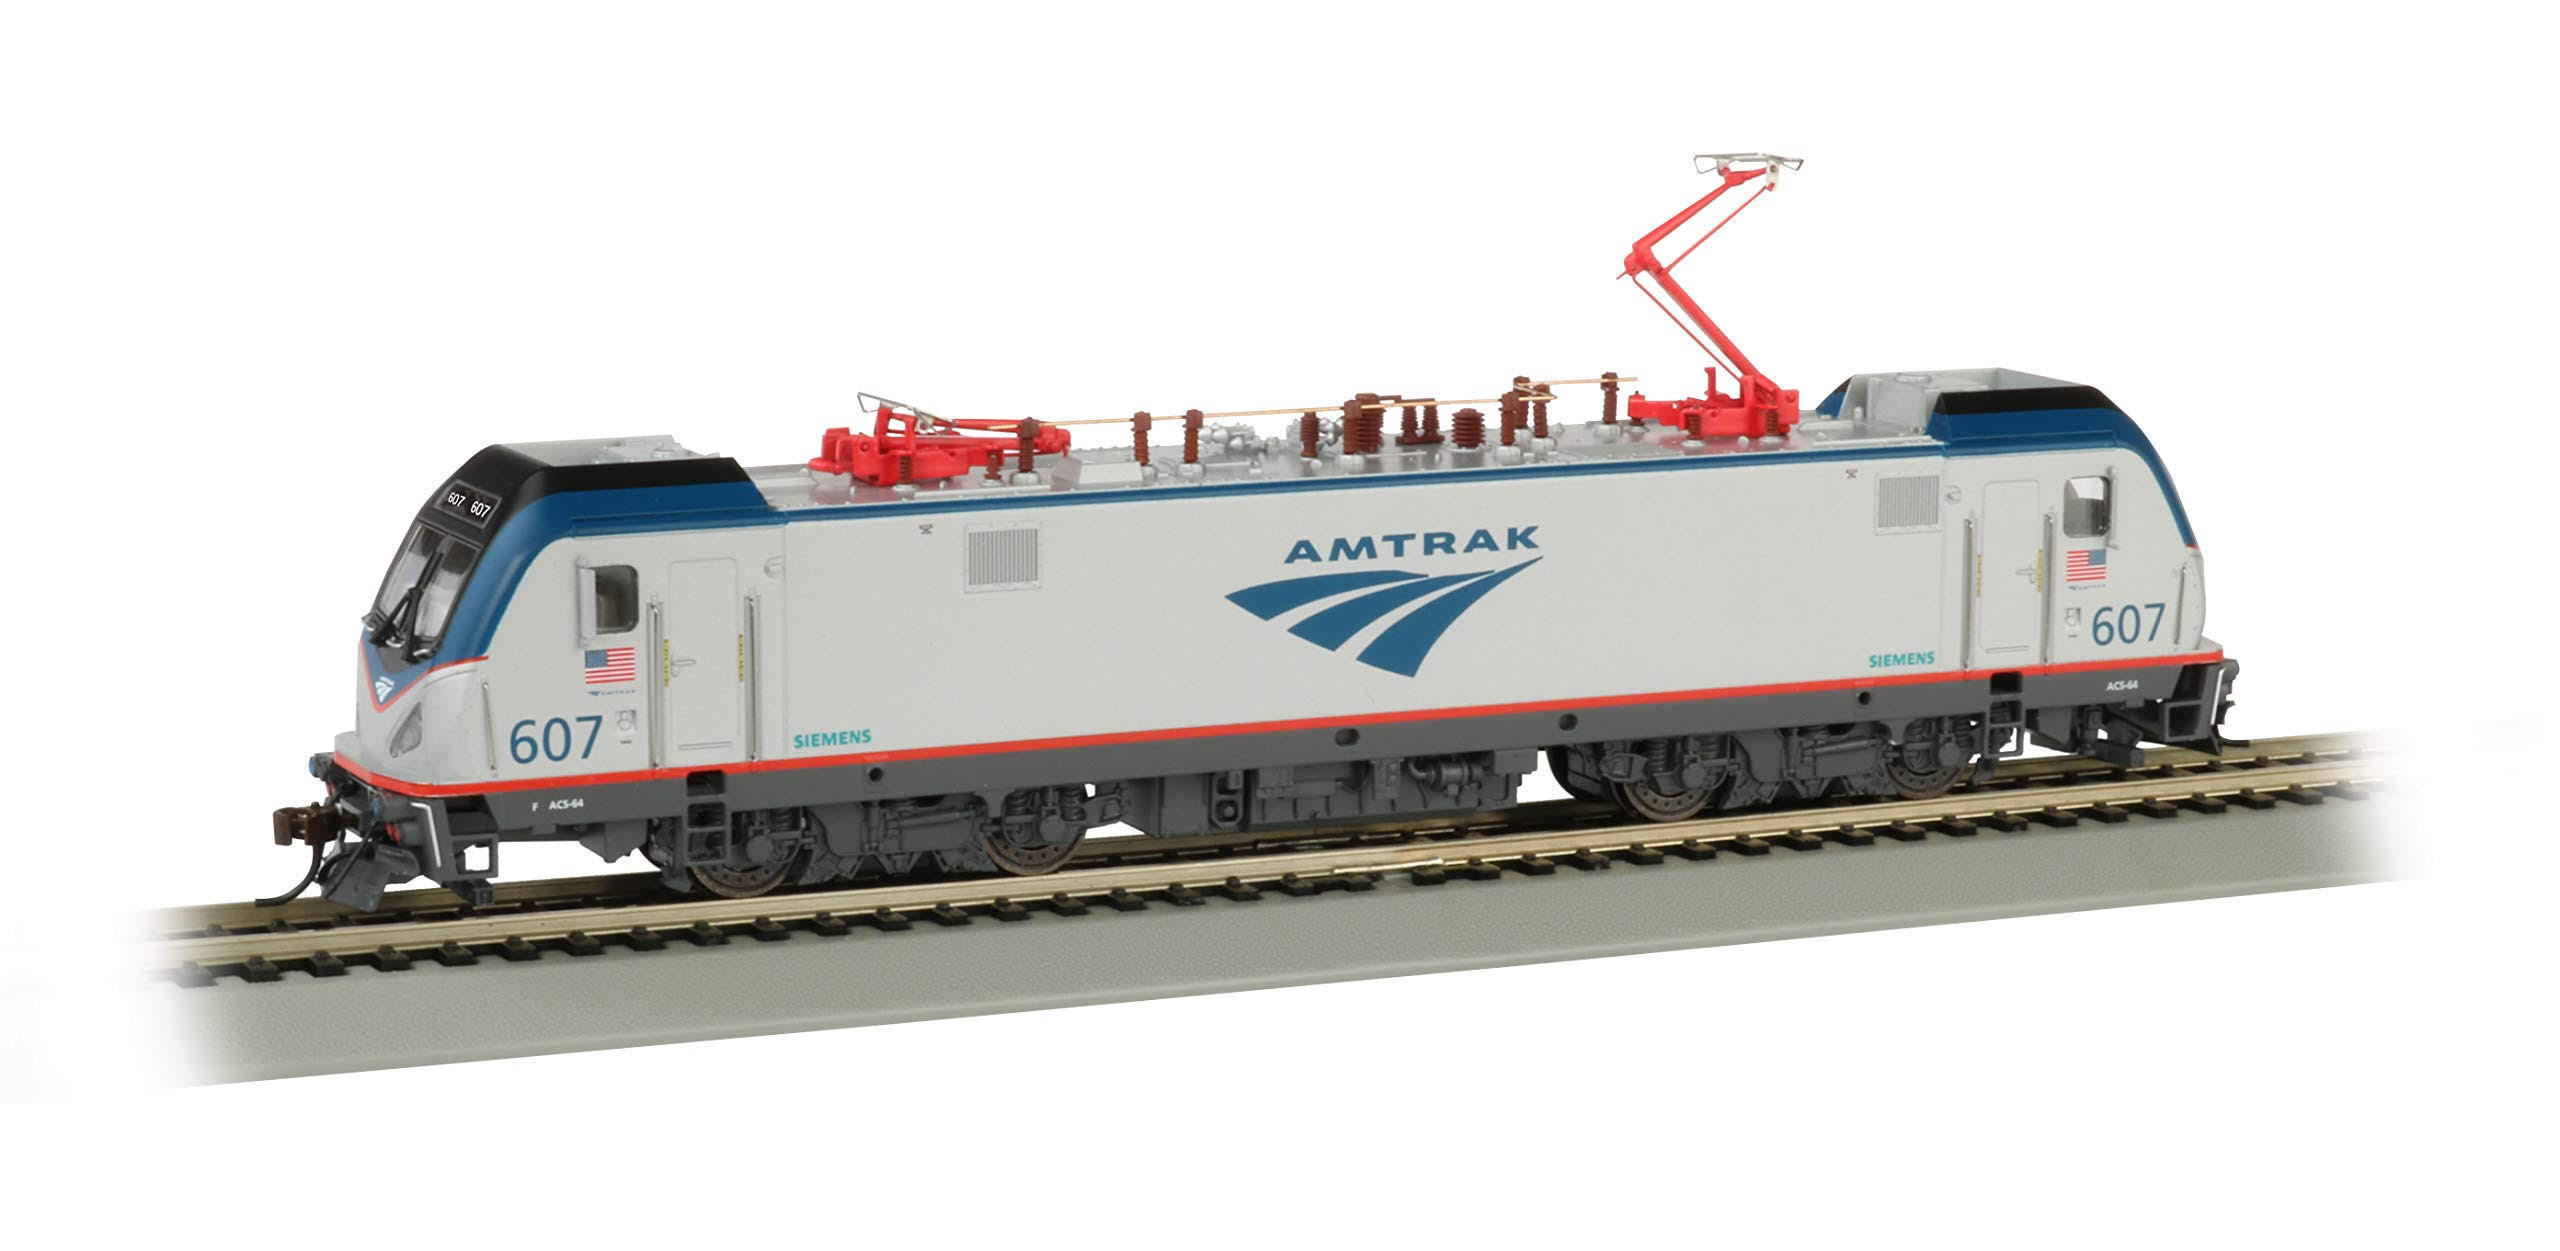 Bachmann Trains ACS-64 Dcc Wowsound Equipped Electric Locomotive Amtra